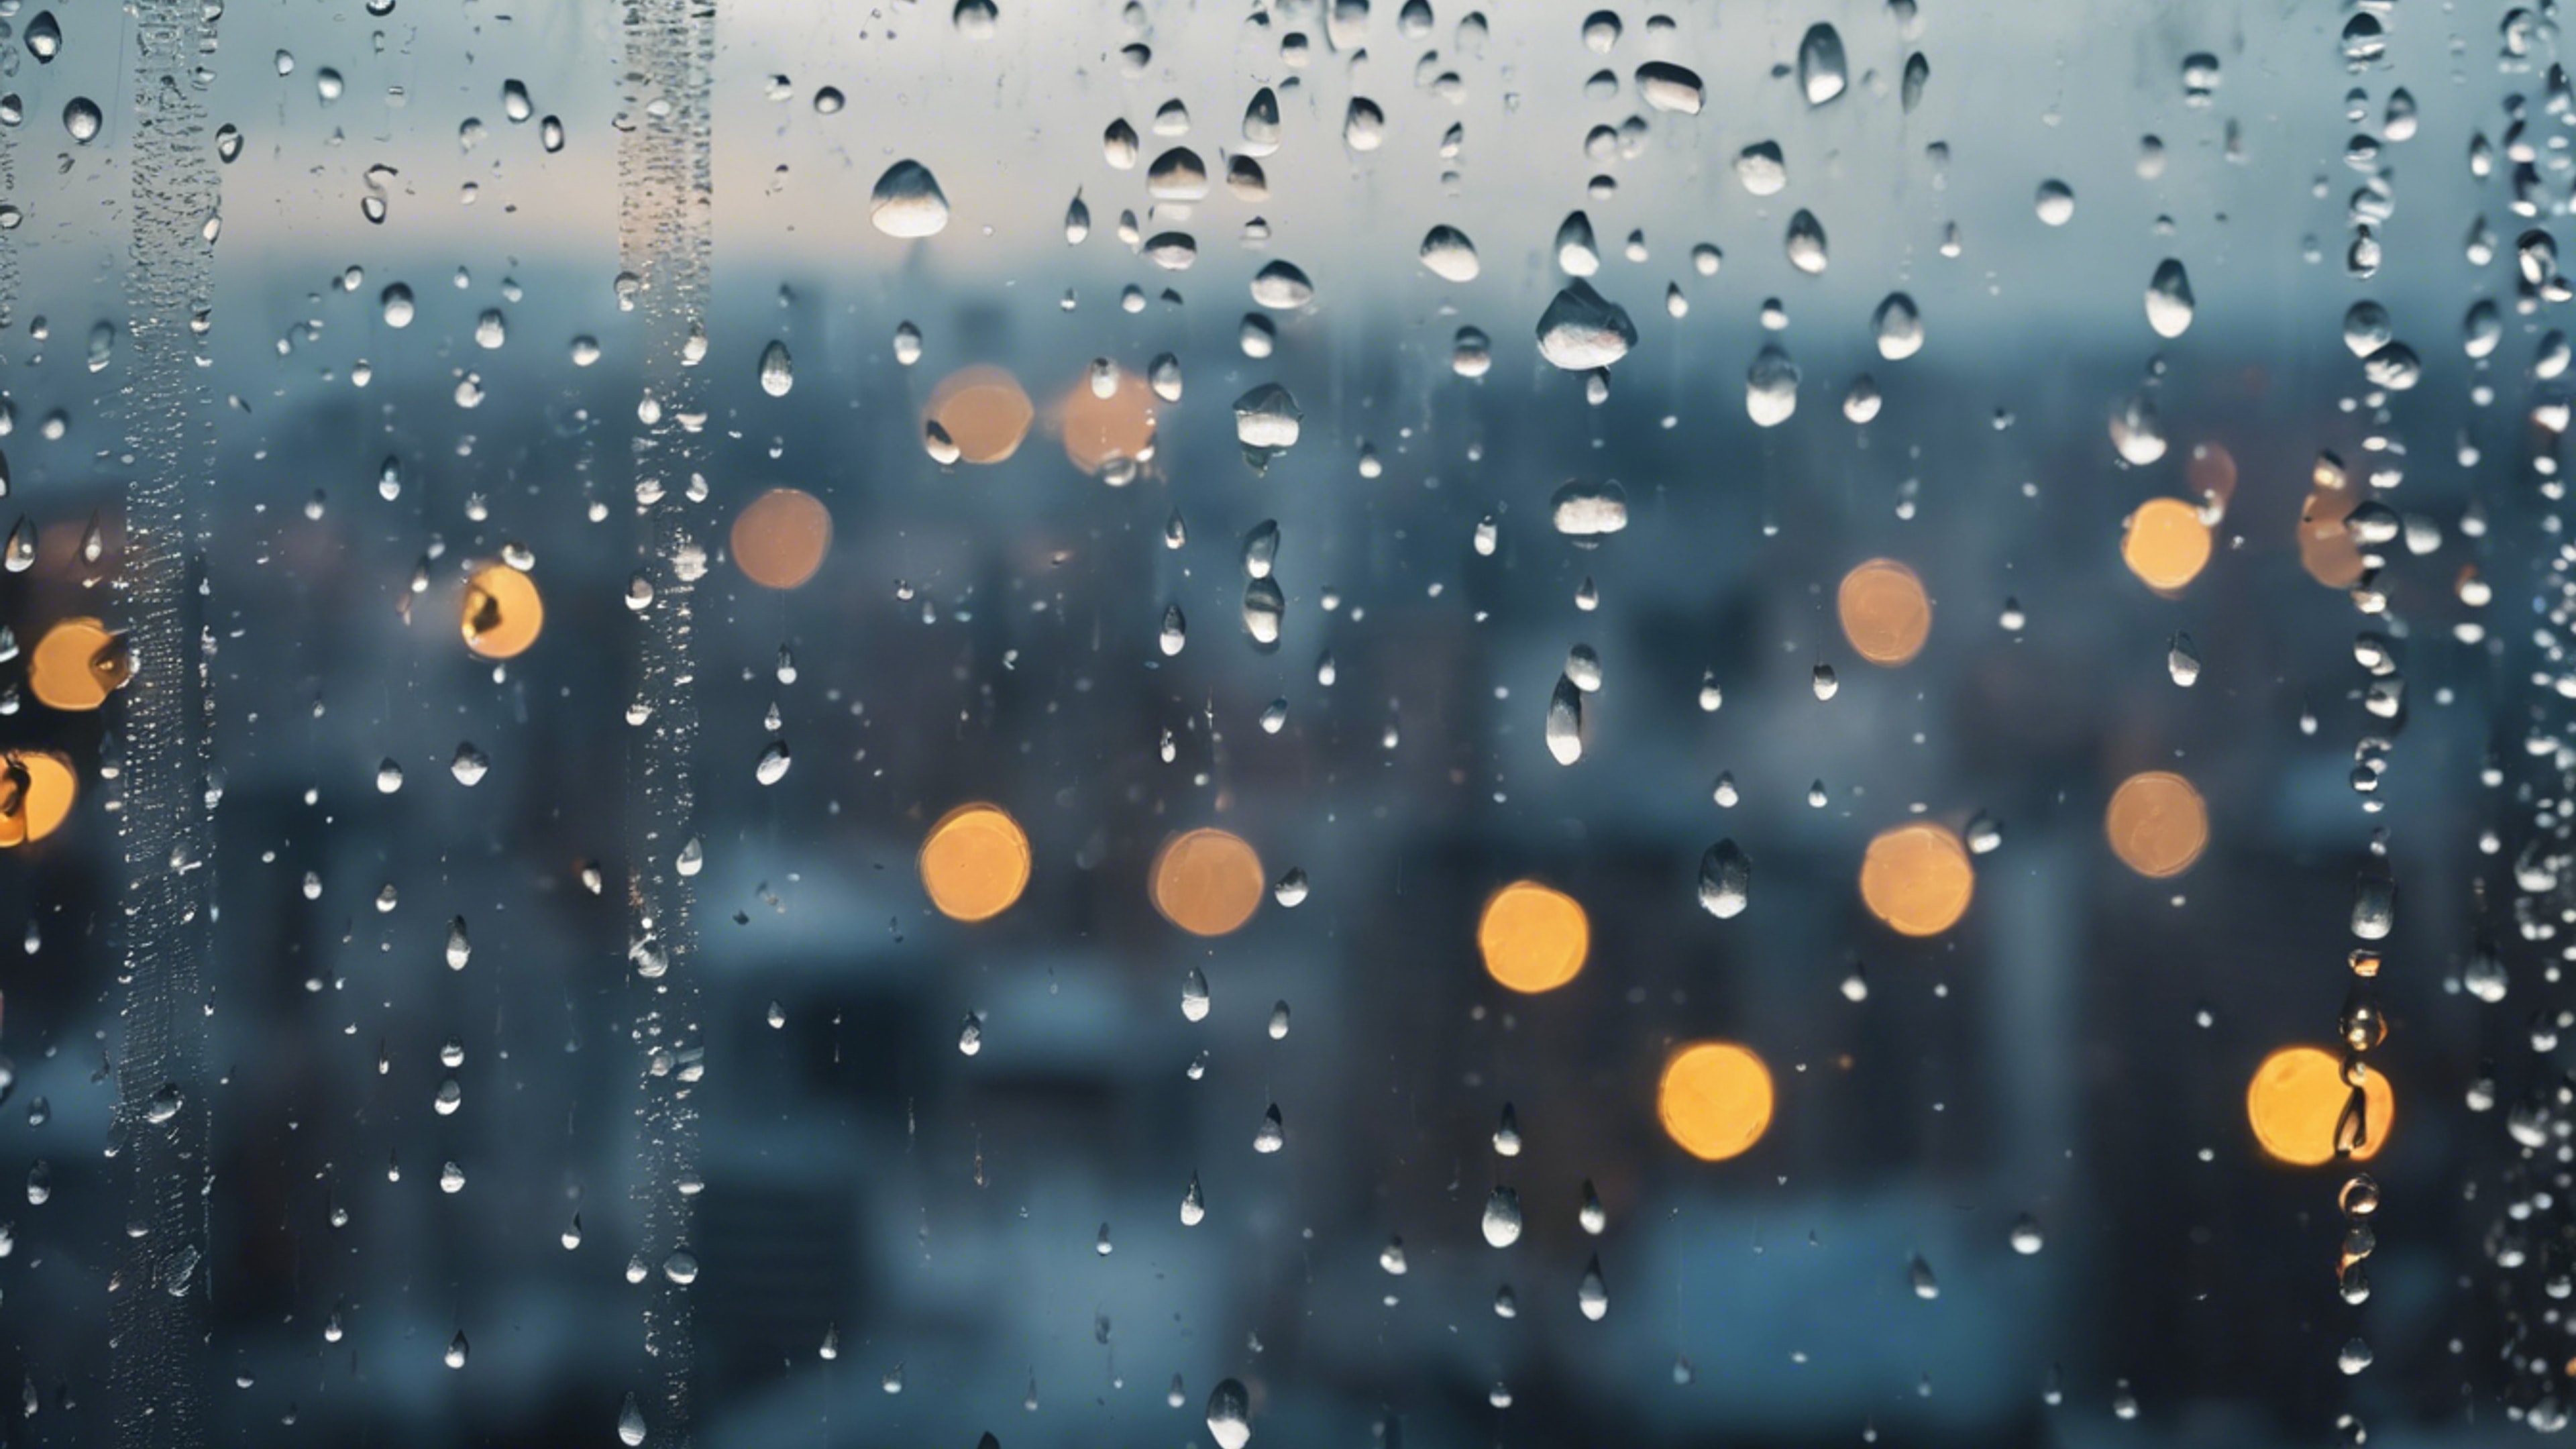 Close-up of raindrops streaming down a window pane, with a blurry cityscape in the background. Шпалери[d0f87e7319714e23a96f]